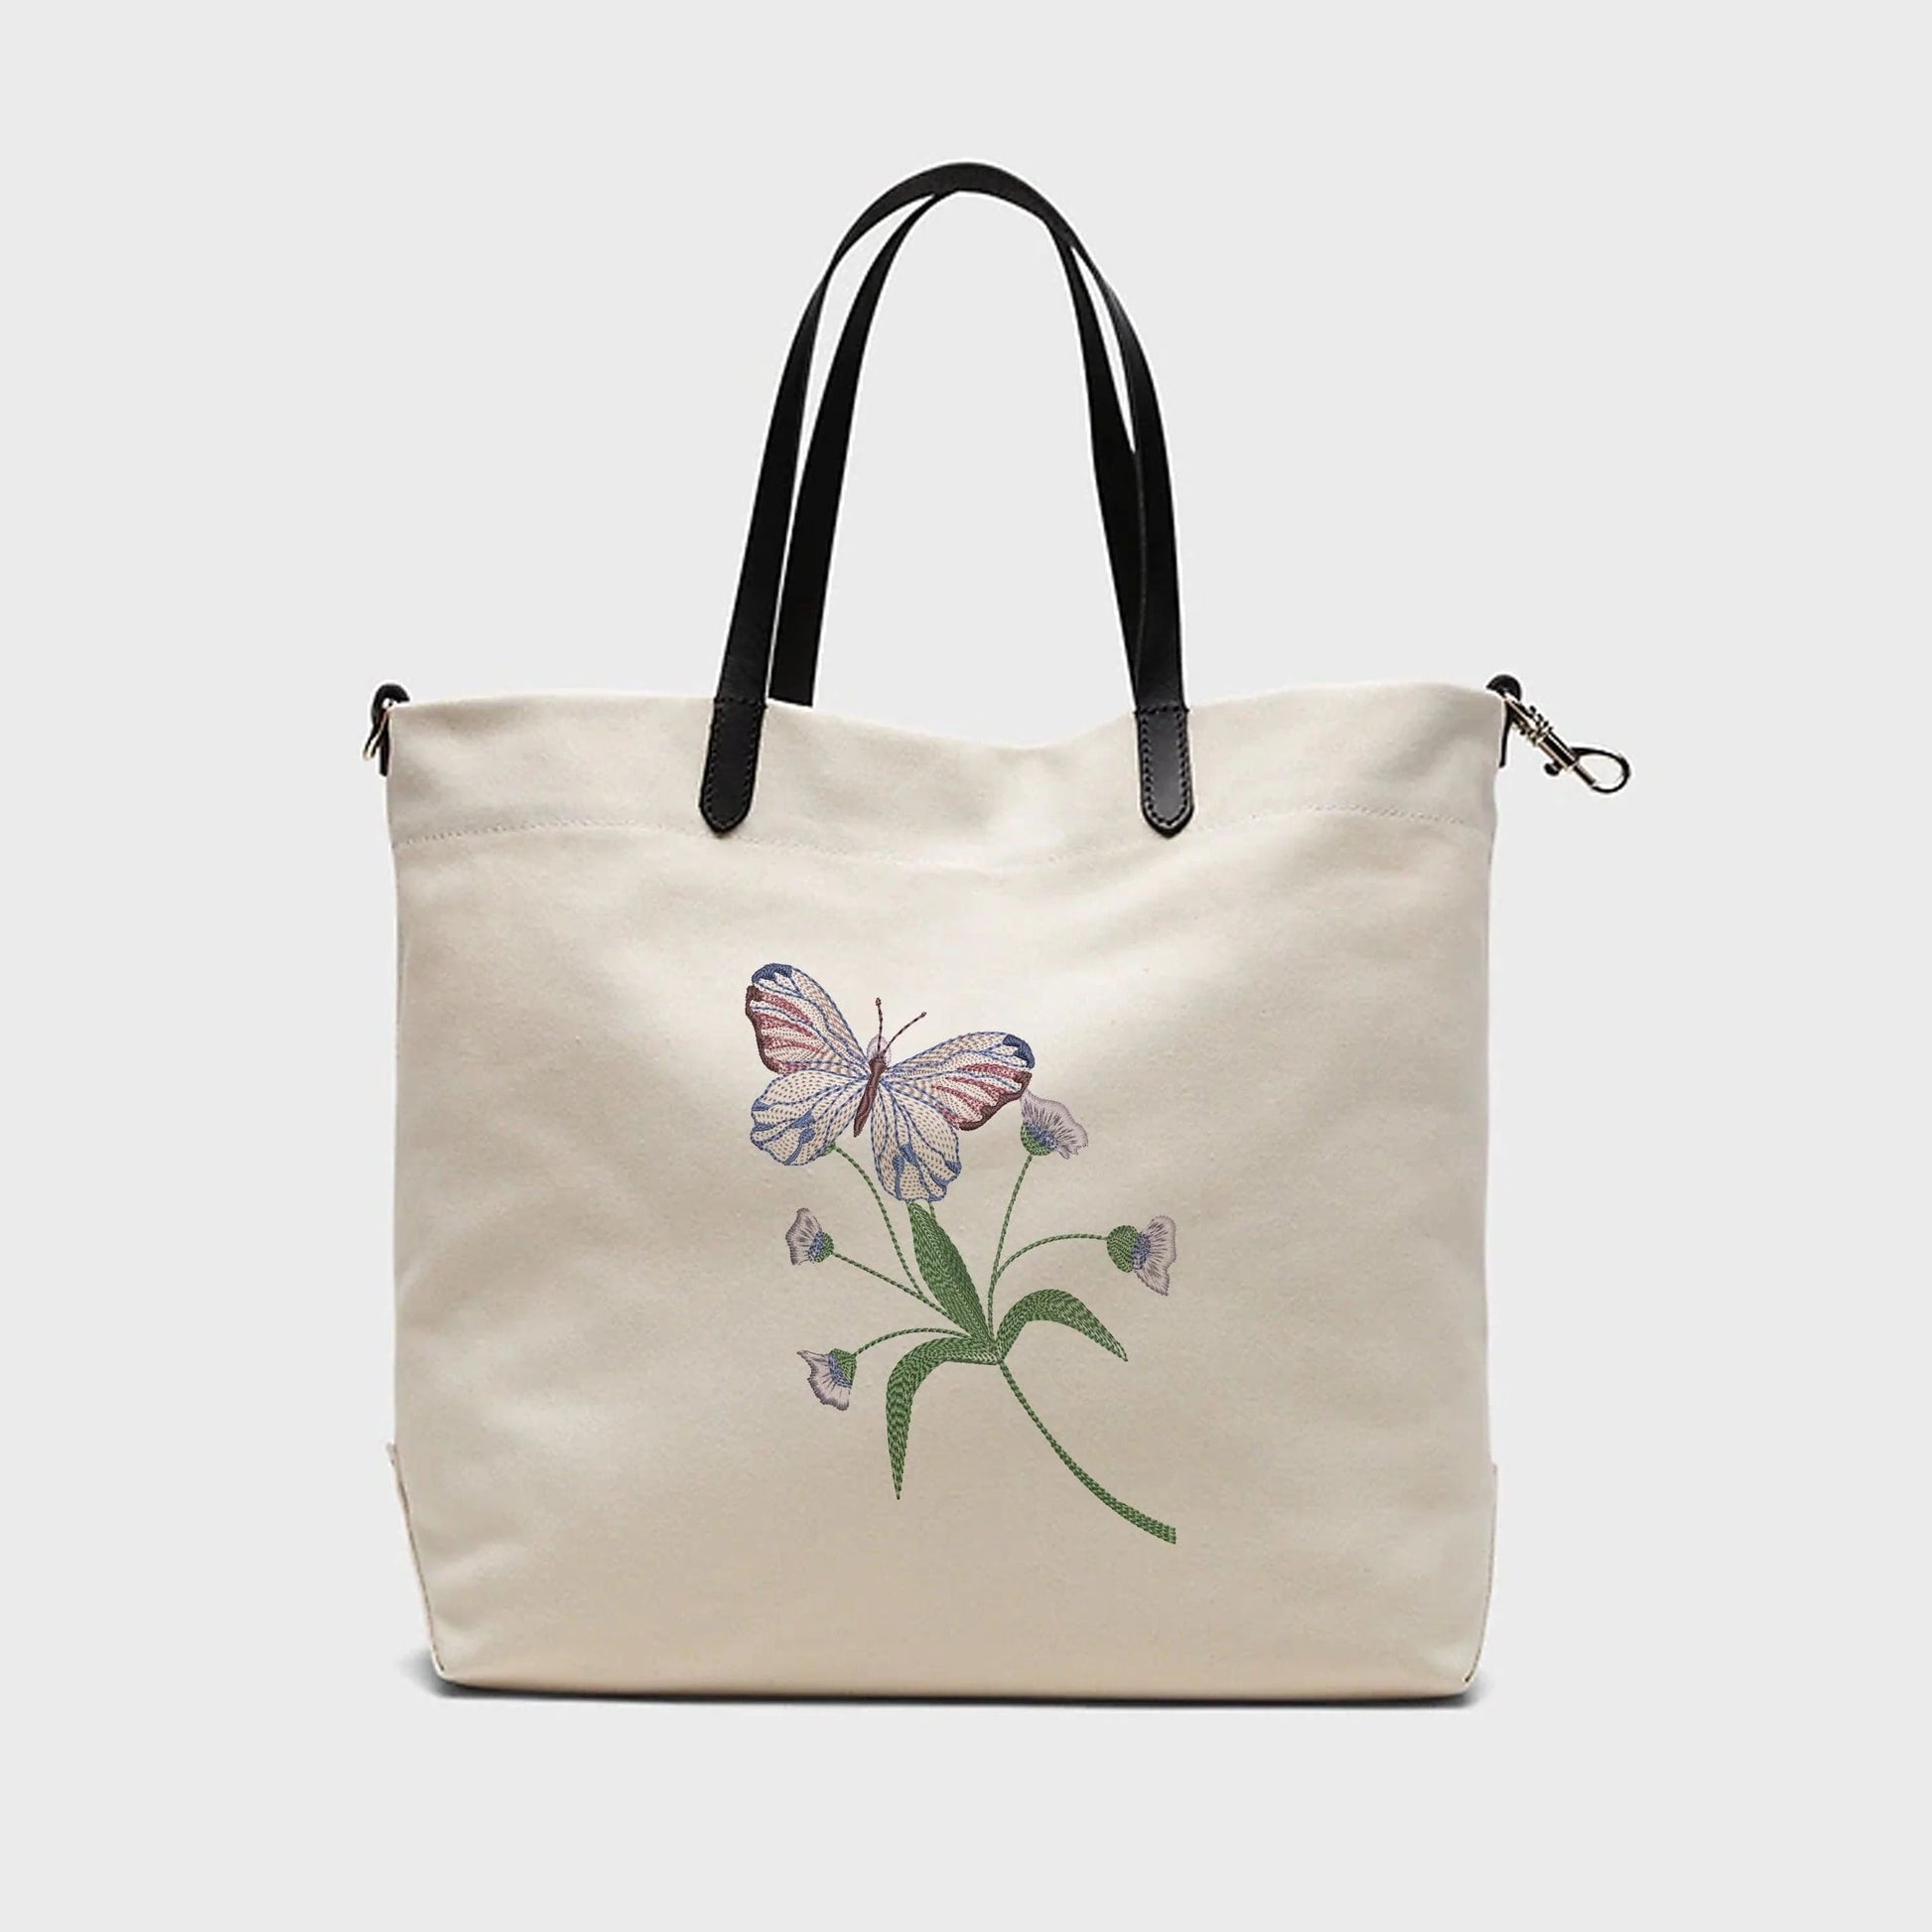 Flower Butterfly Machine Embroidery Design on large handbag